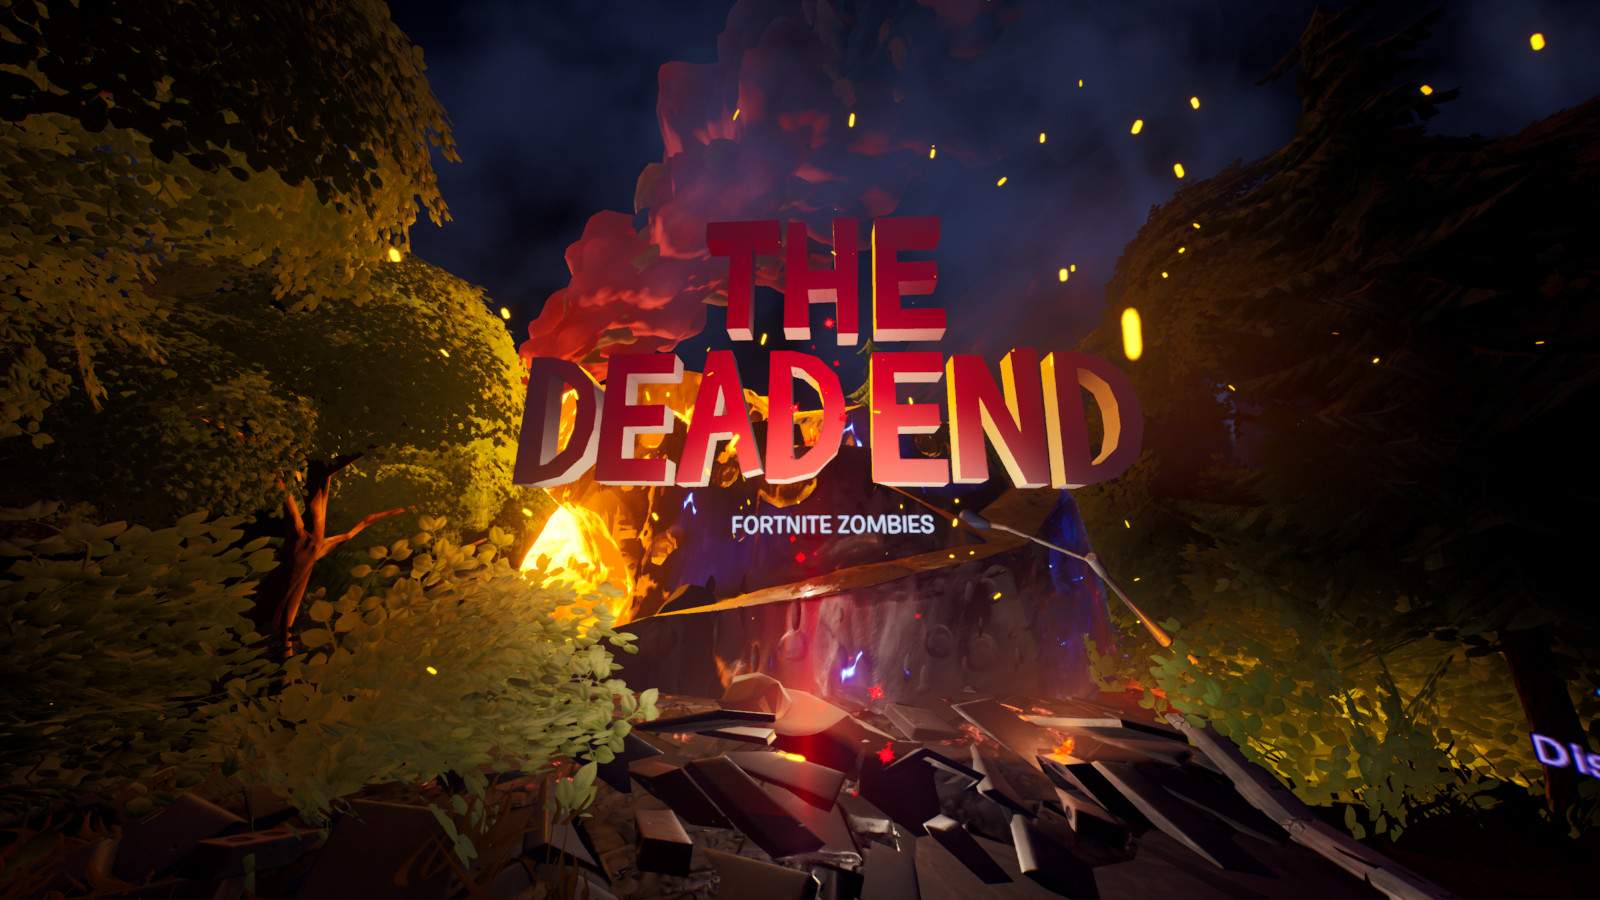 THE DEAD END - FORTNITE ZOMBIES